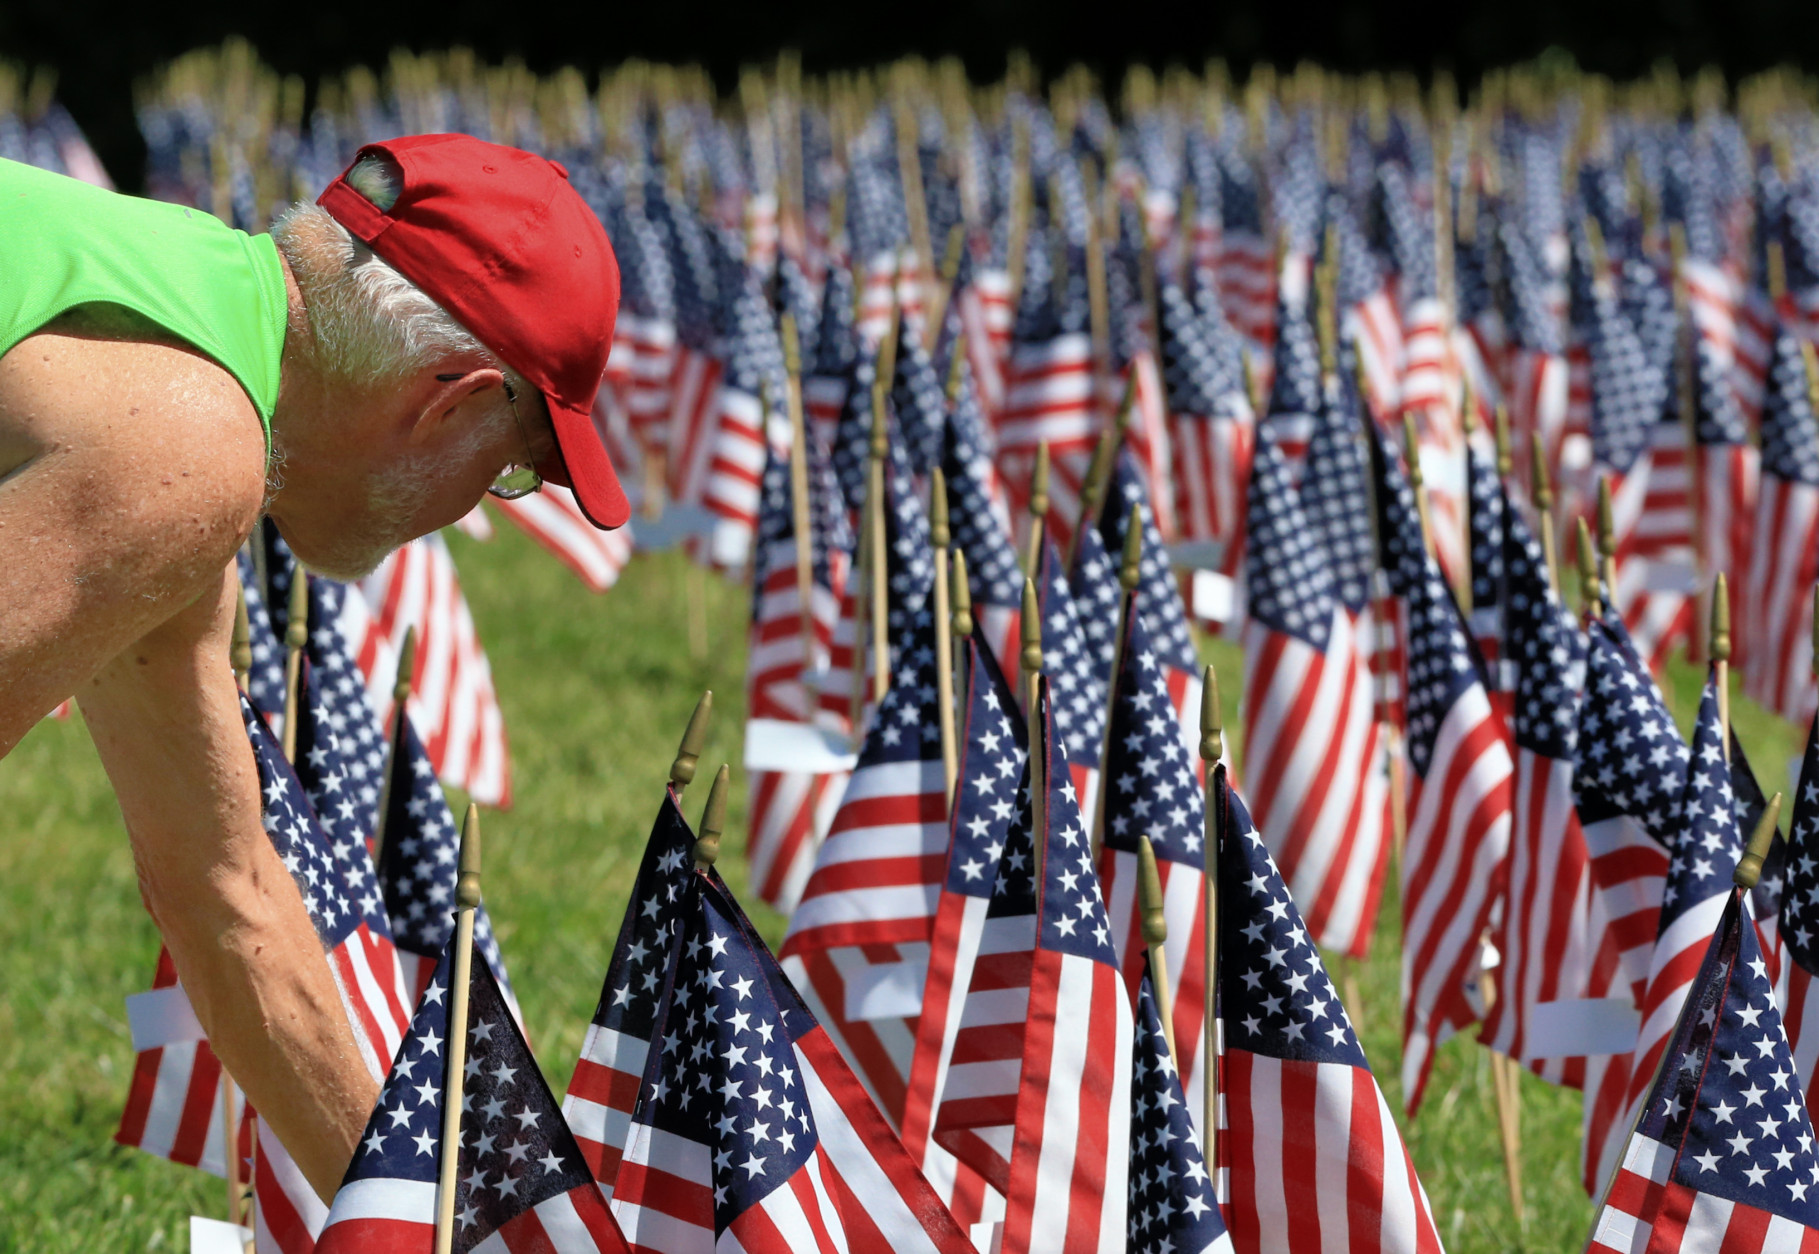 Tom Cody of Omaha searches Thursday, Sept. 10, 2015, for the flag carrying the name of a Creighton schoolmate who died in the Sept. 11 attacks in Omaha, Neb. Flags with the names of all victims were placed at Memorial Park as a tribute to the fallen. (AP Photo/Nati Harnik)